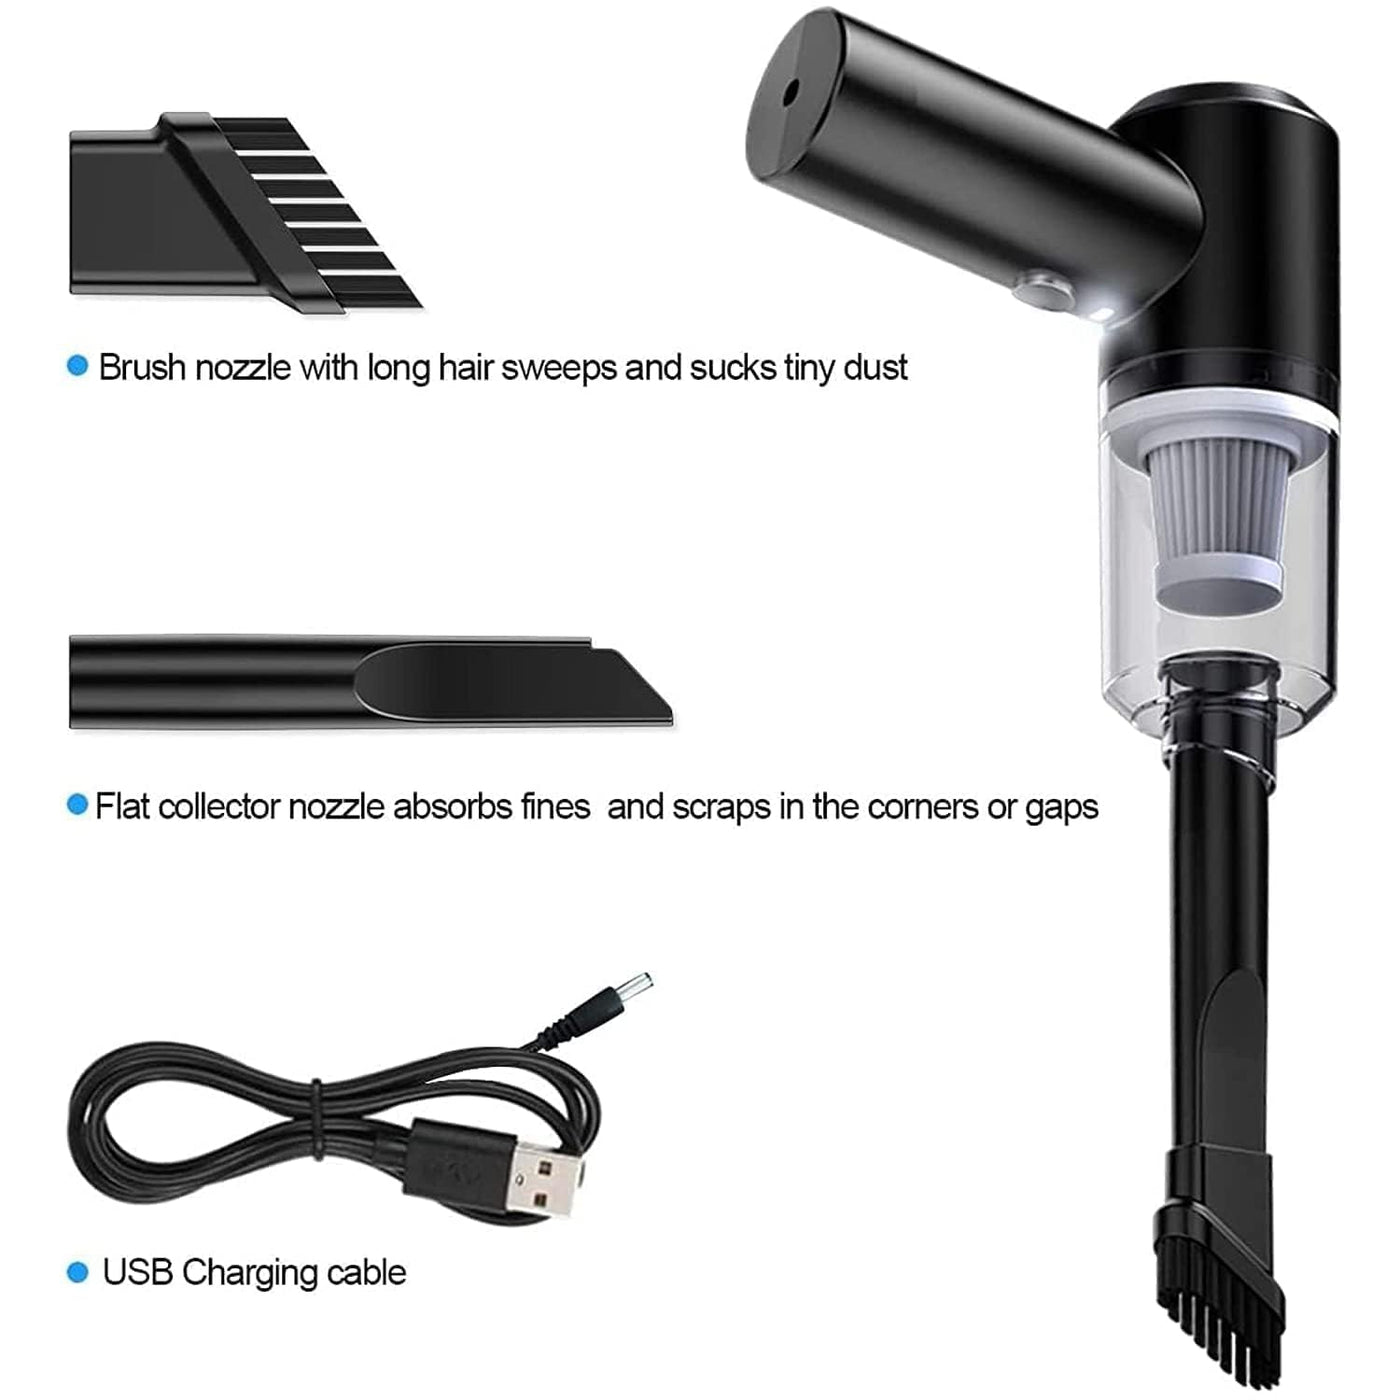 2 in 1 Vacuum Cleaner - Portable Air Duster Wireless everrd